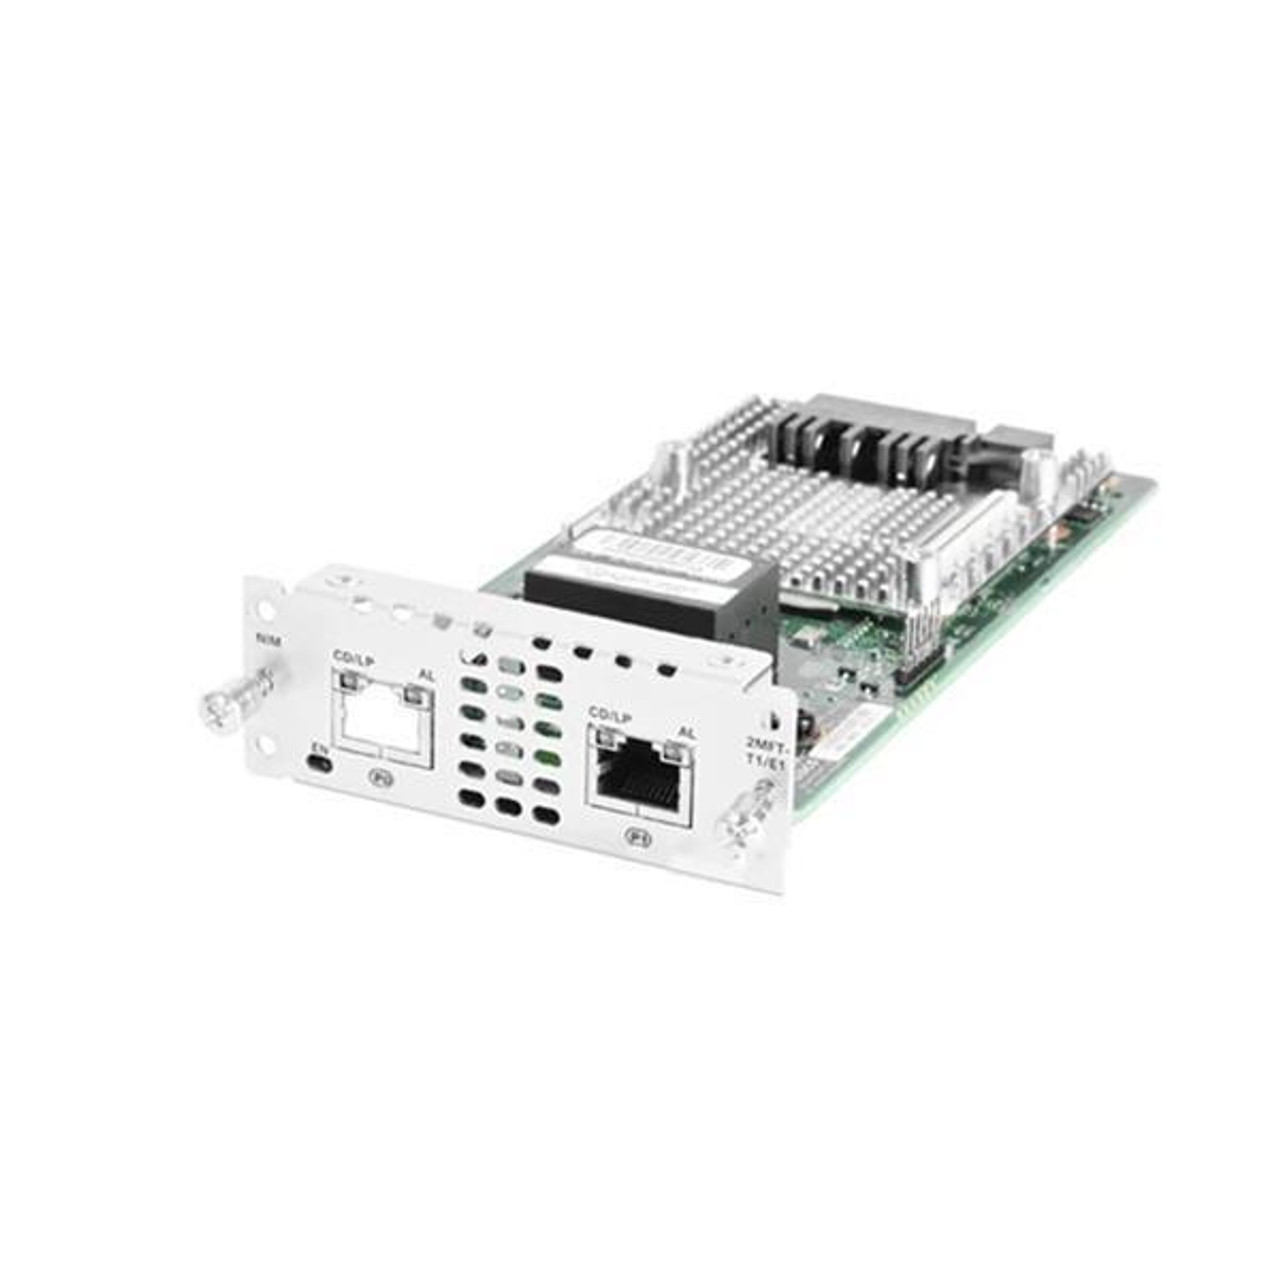 0231A63X 3Com 1-Port T1 Voice Flexible Interface Card 1 x Channelized T1/ISDN PRI WAN Interface Module (Refurbished)